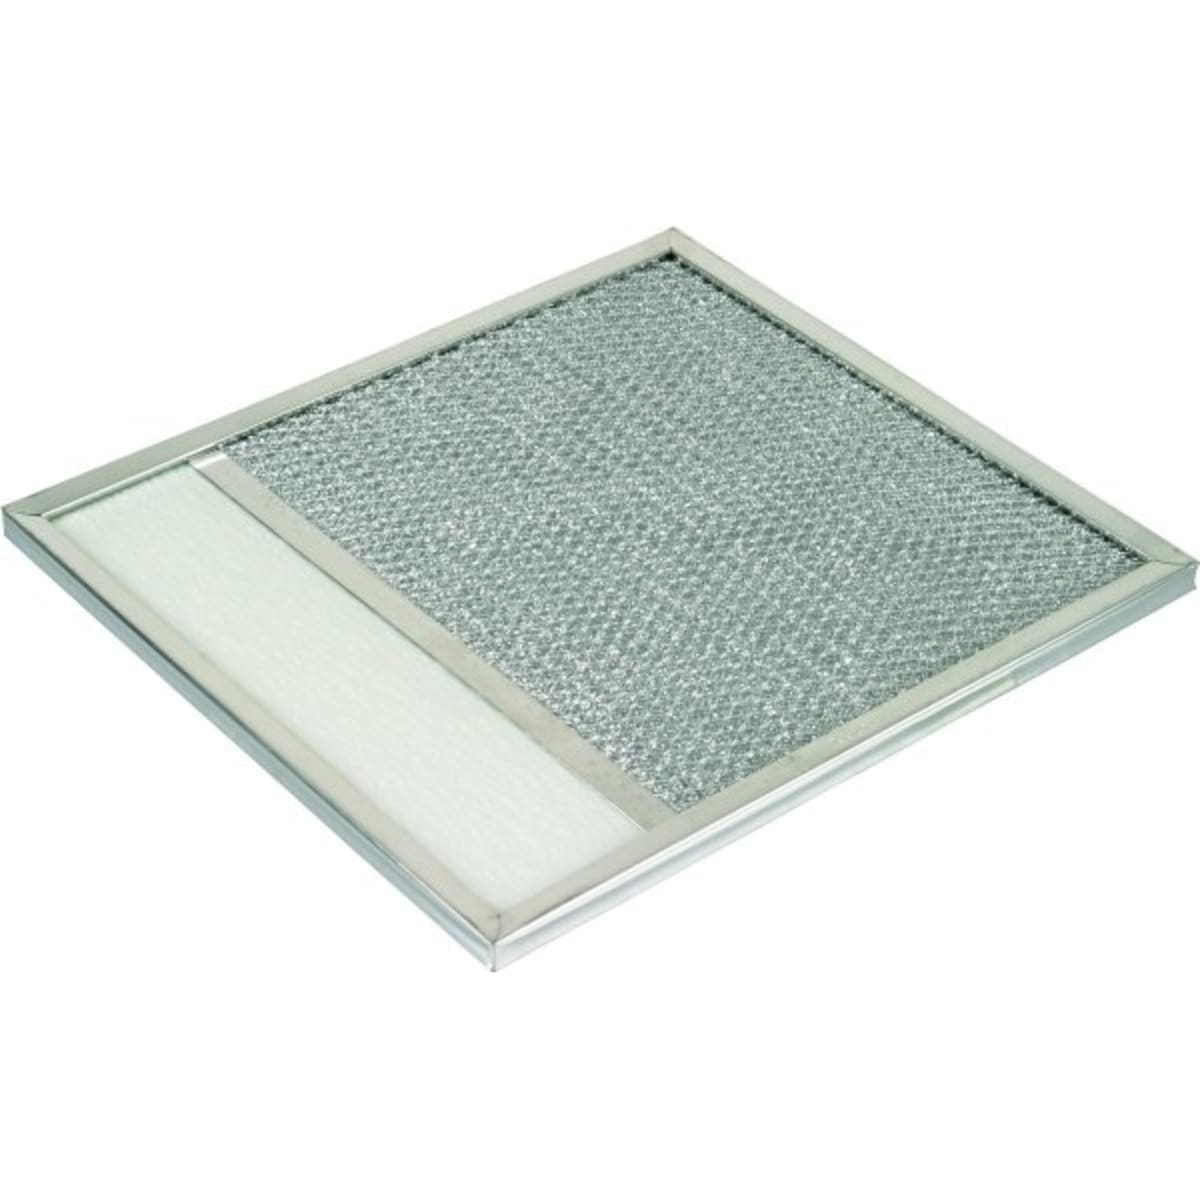 Aluminum Replacement Range Hood Filter 9-7/8 inch x 11-11/16 inch x 3/8 inch (2-Pack)